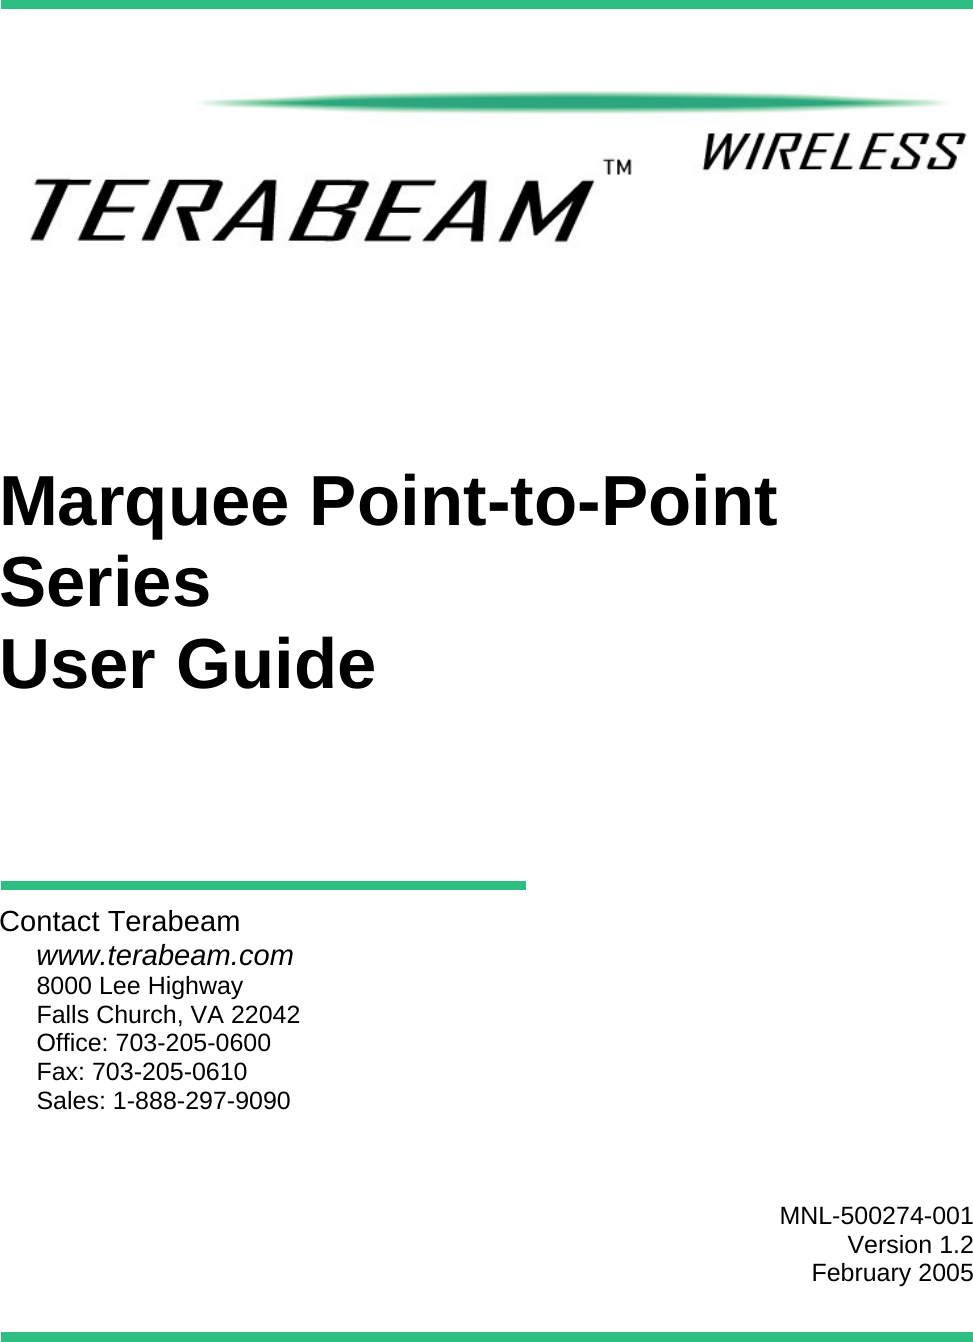             Marquee Point-to-Point Series User Guide        Contact Terabeam www.terabeam.com 8000 Lee Highway Falls Church, VA 22042 Office: 703-205-0600 Fax: 703-205-0610 Sales: 1-888-297-9090     MNL-500274-001 Version 1.2 February 2005   